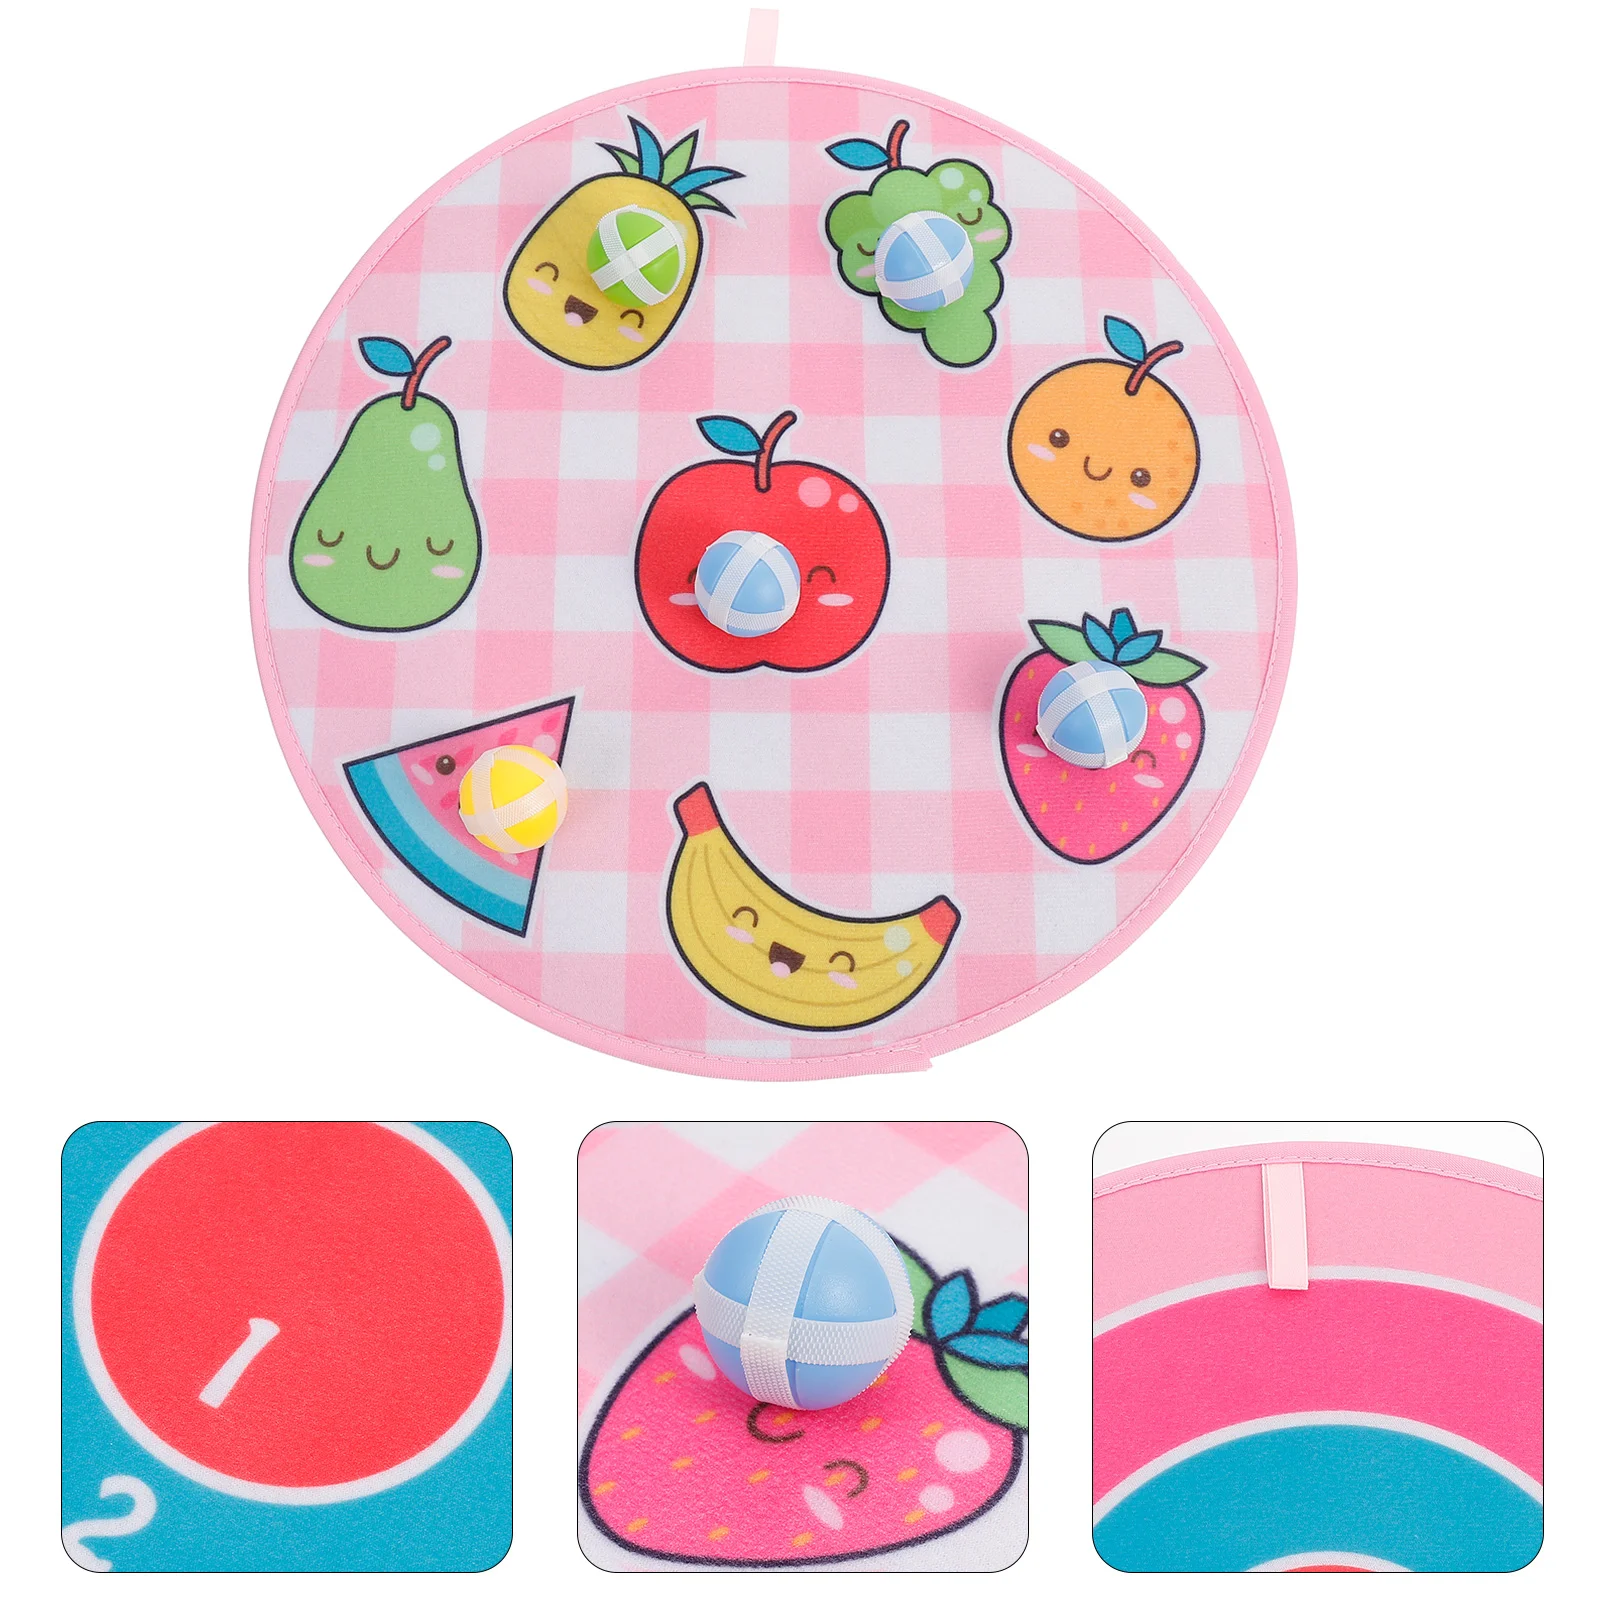 Dart Gamecatch Kids Toss Toys Paddle Board Sticky Toygames Set Office Throw Outdoor Disc Sports Children Indoor Balls Activity men s sport suit solid color light board fleece warm autumn winter sweater hoodie loose sports pullover